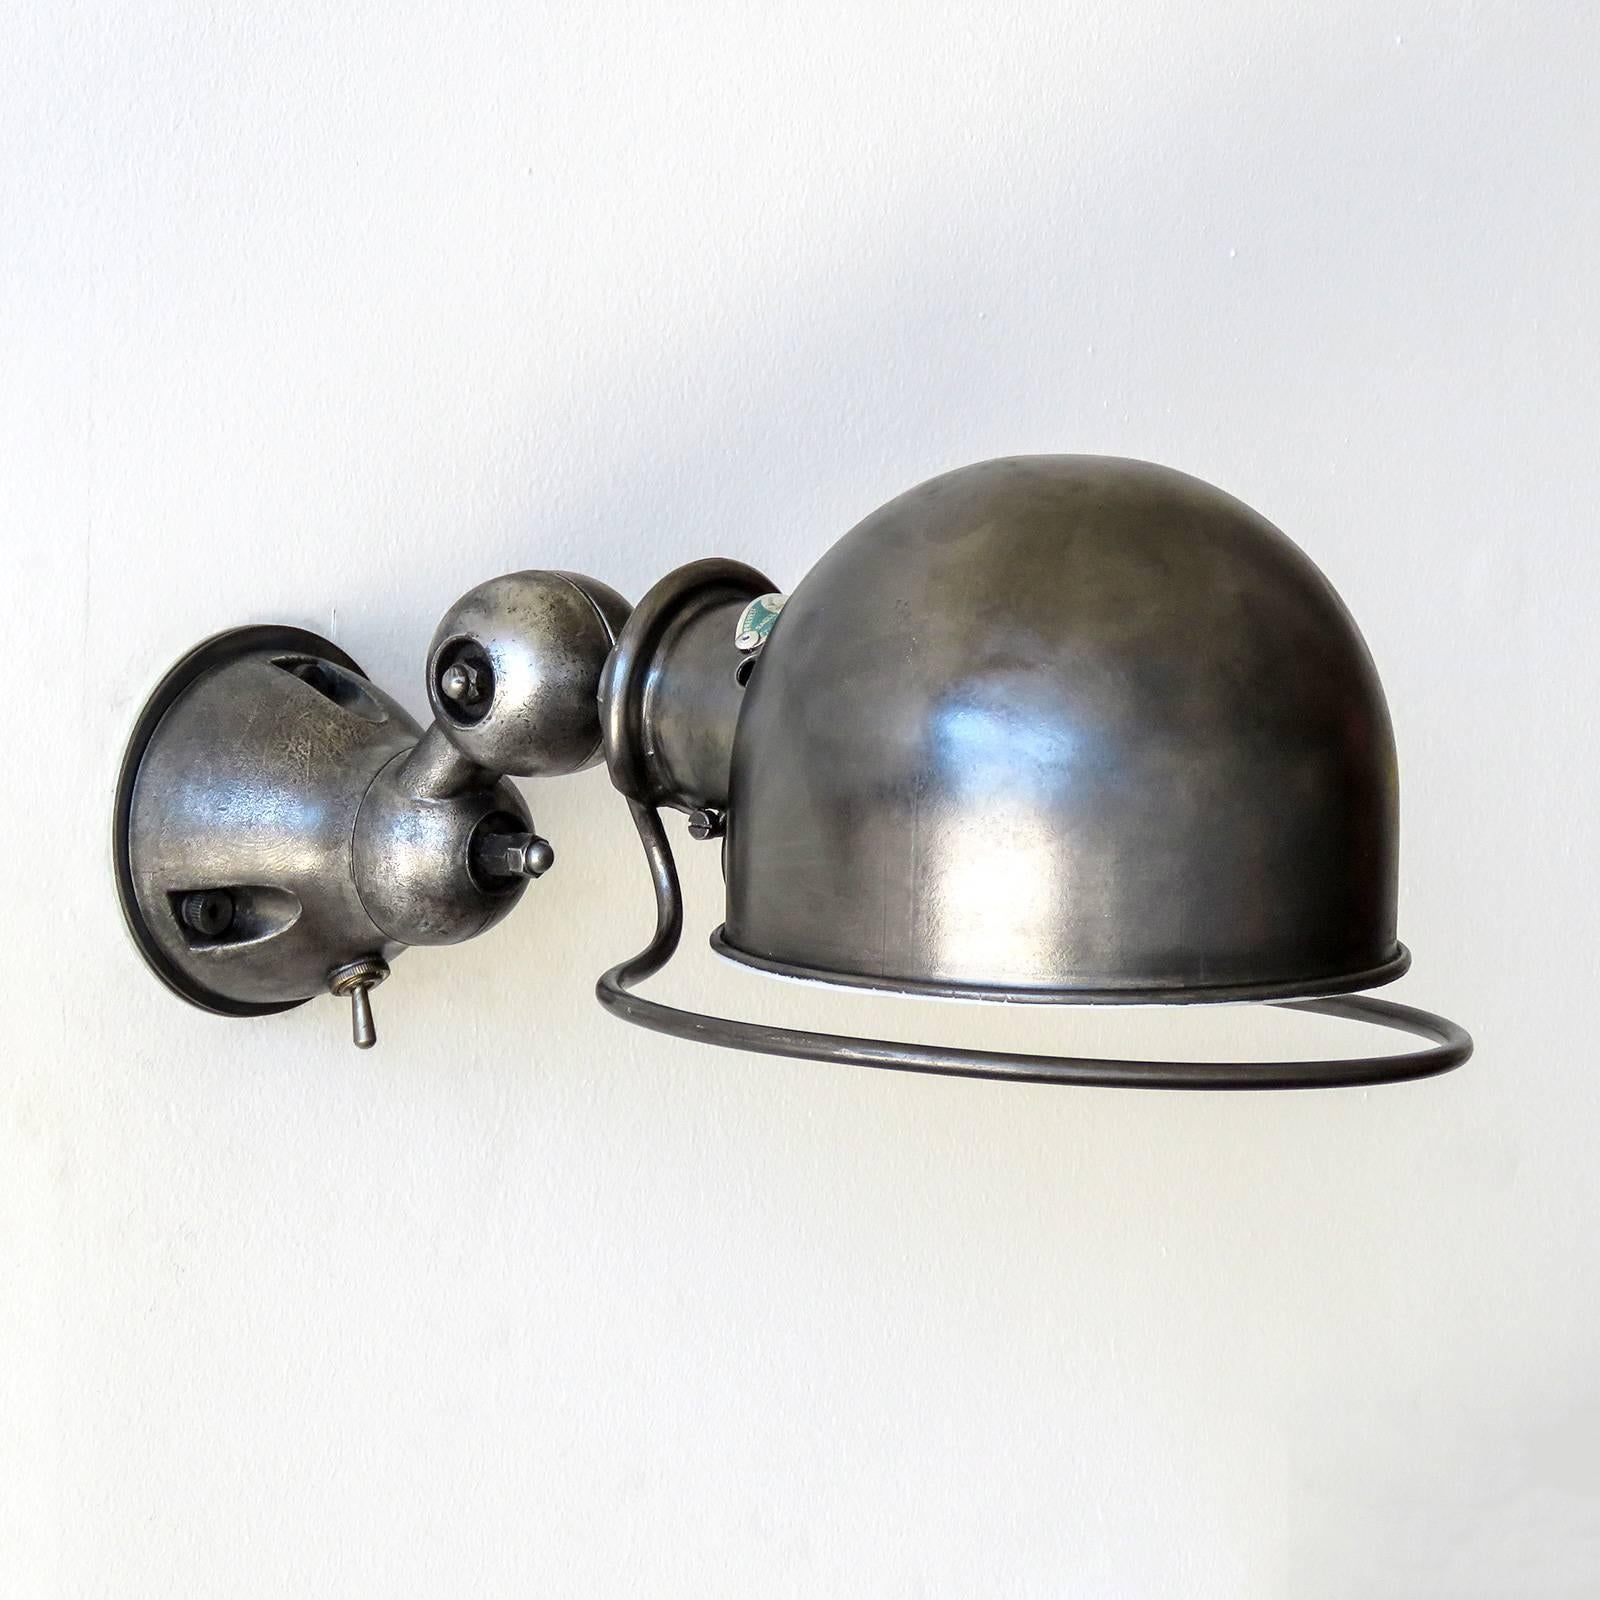 Industrial wall lights by Jean-Louis Domecq for Jielde, each sconce rotates and swivels separately on two axis for full coverage. Green plate edition with a graphite finish and white enameled inside of the shade. Priced as a pair @ $2600.00